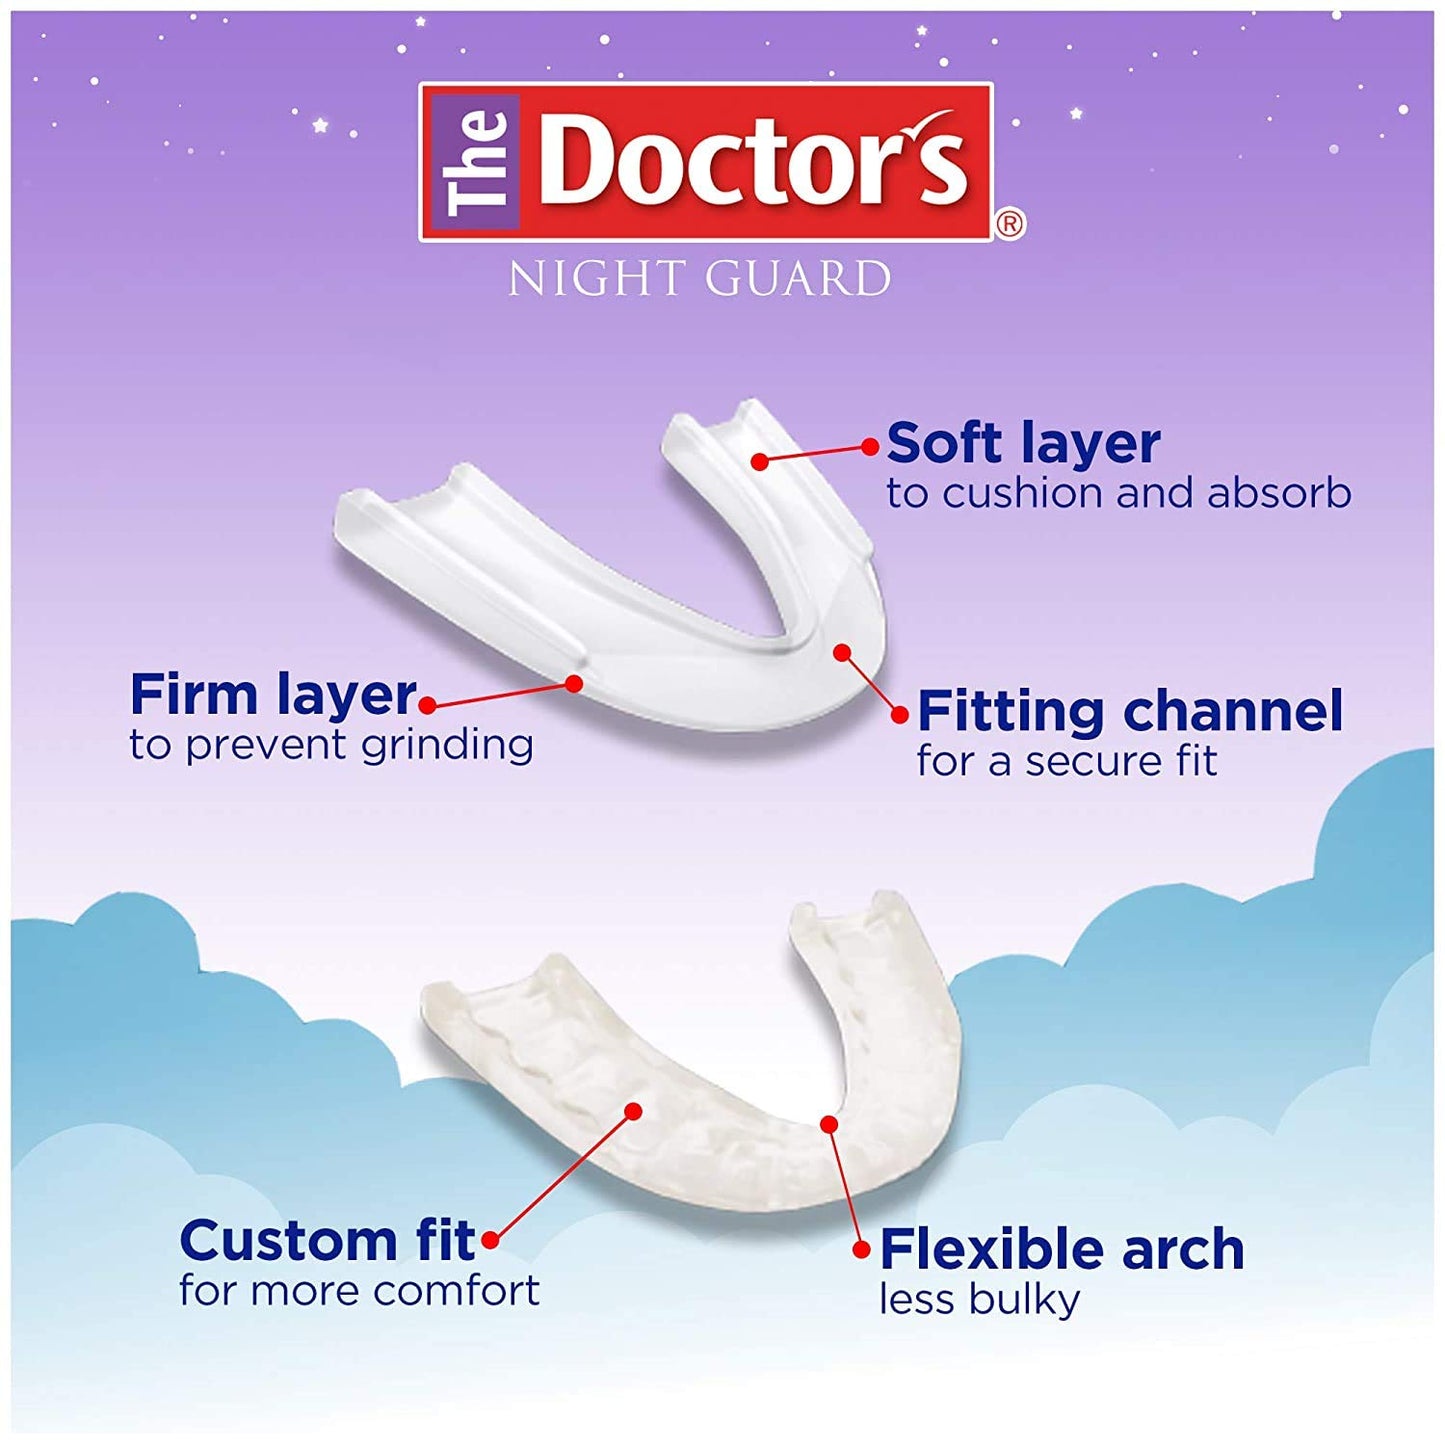 The Doctor’s NightGuard for Teeth Grinding